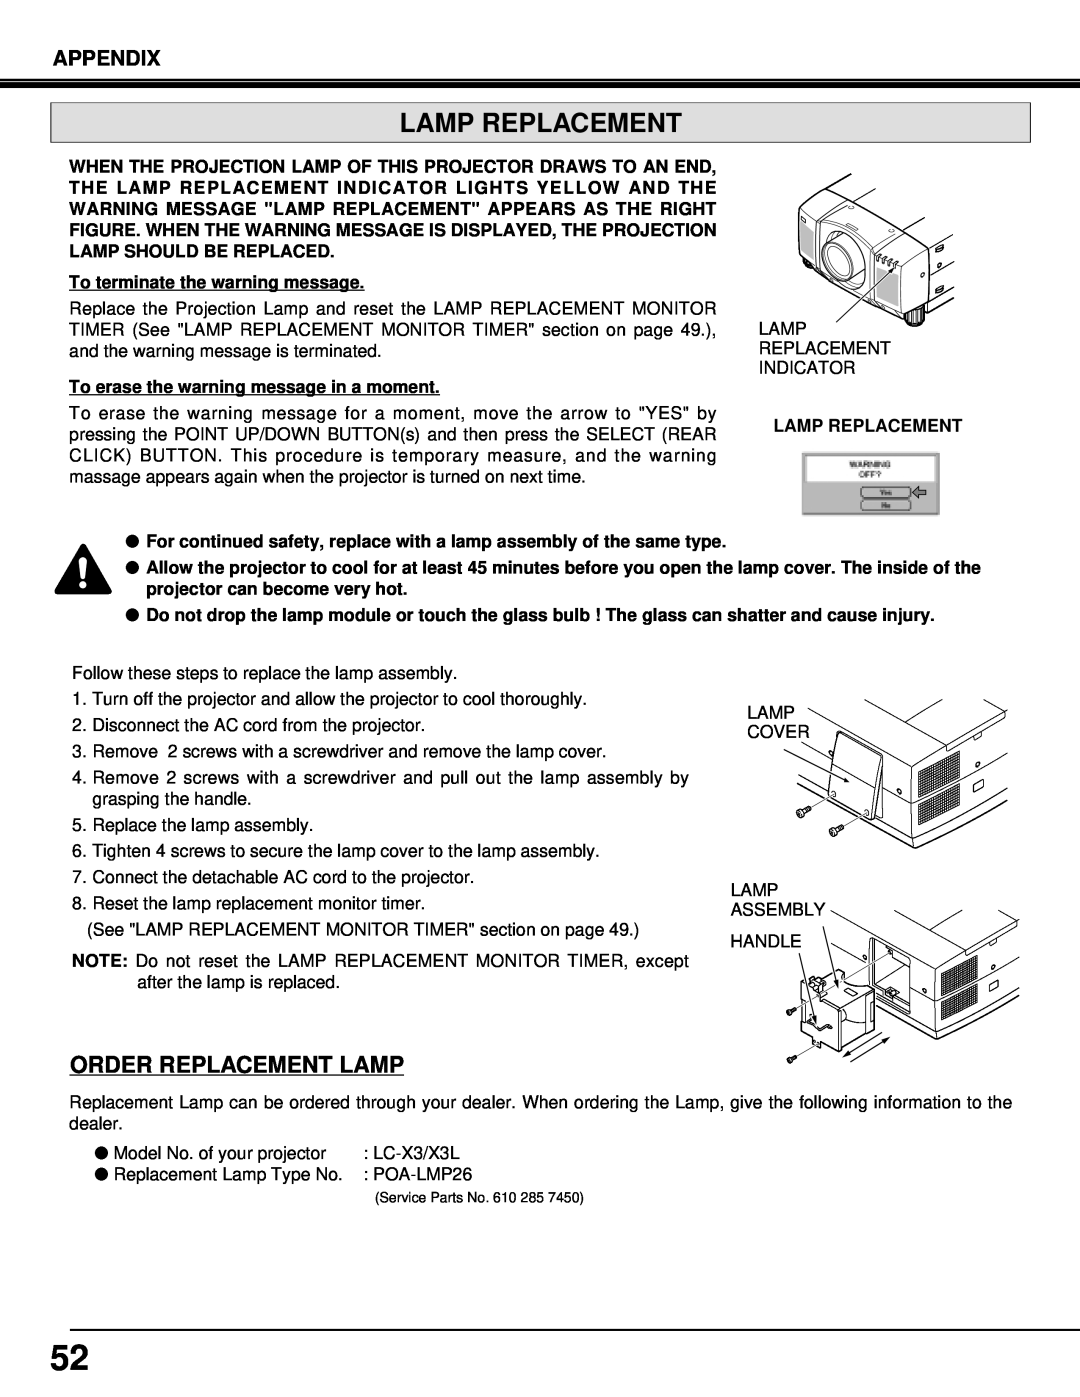 Eiki LC-X3/X3L instruction manual Lamp Replacement, Order Replacement Lamp, To terminate the warning message, Appendix 